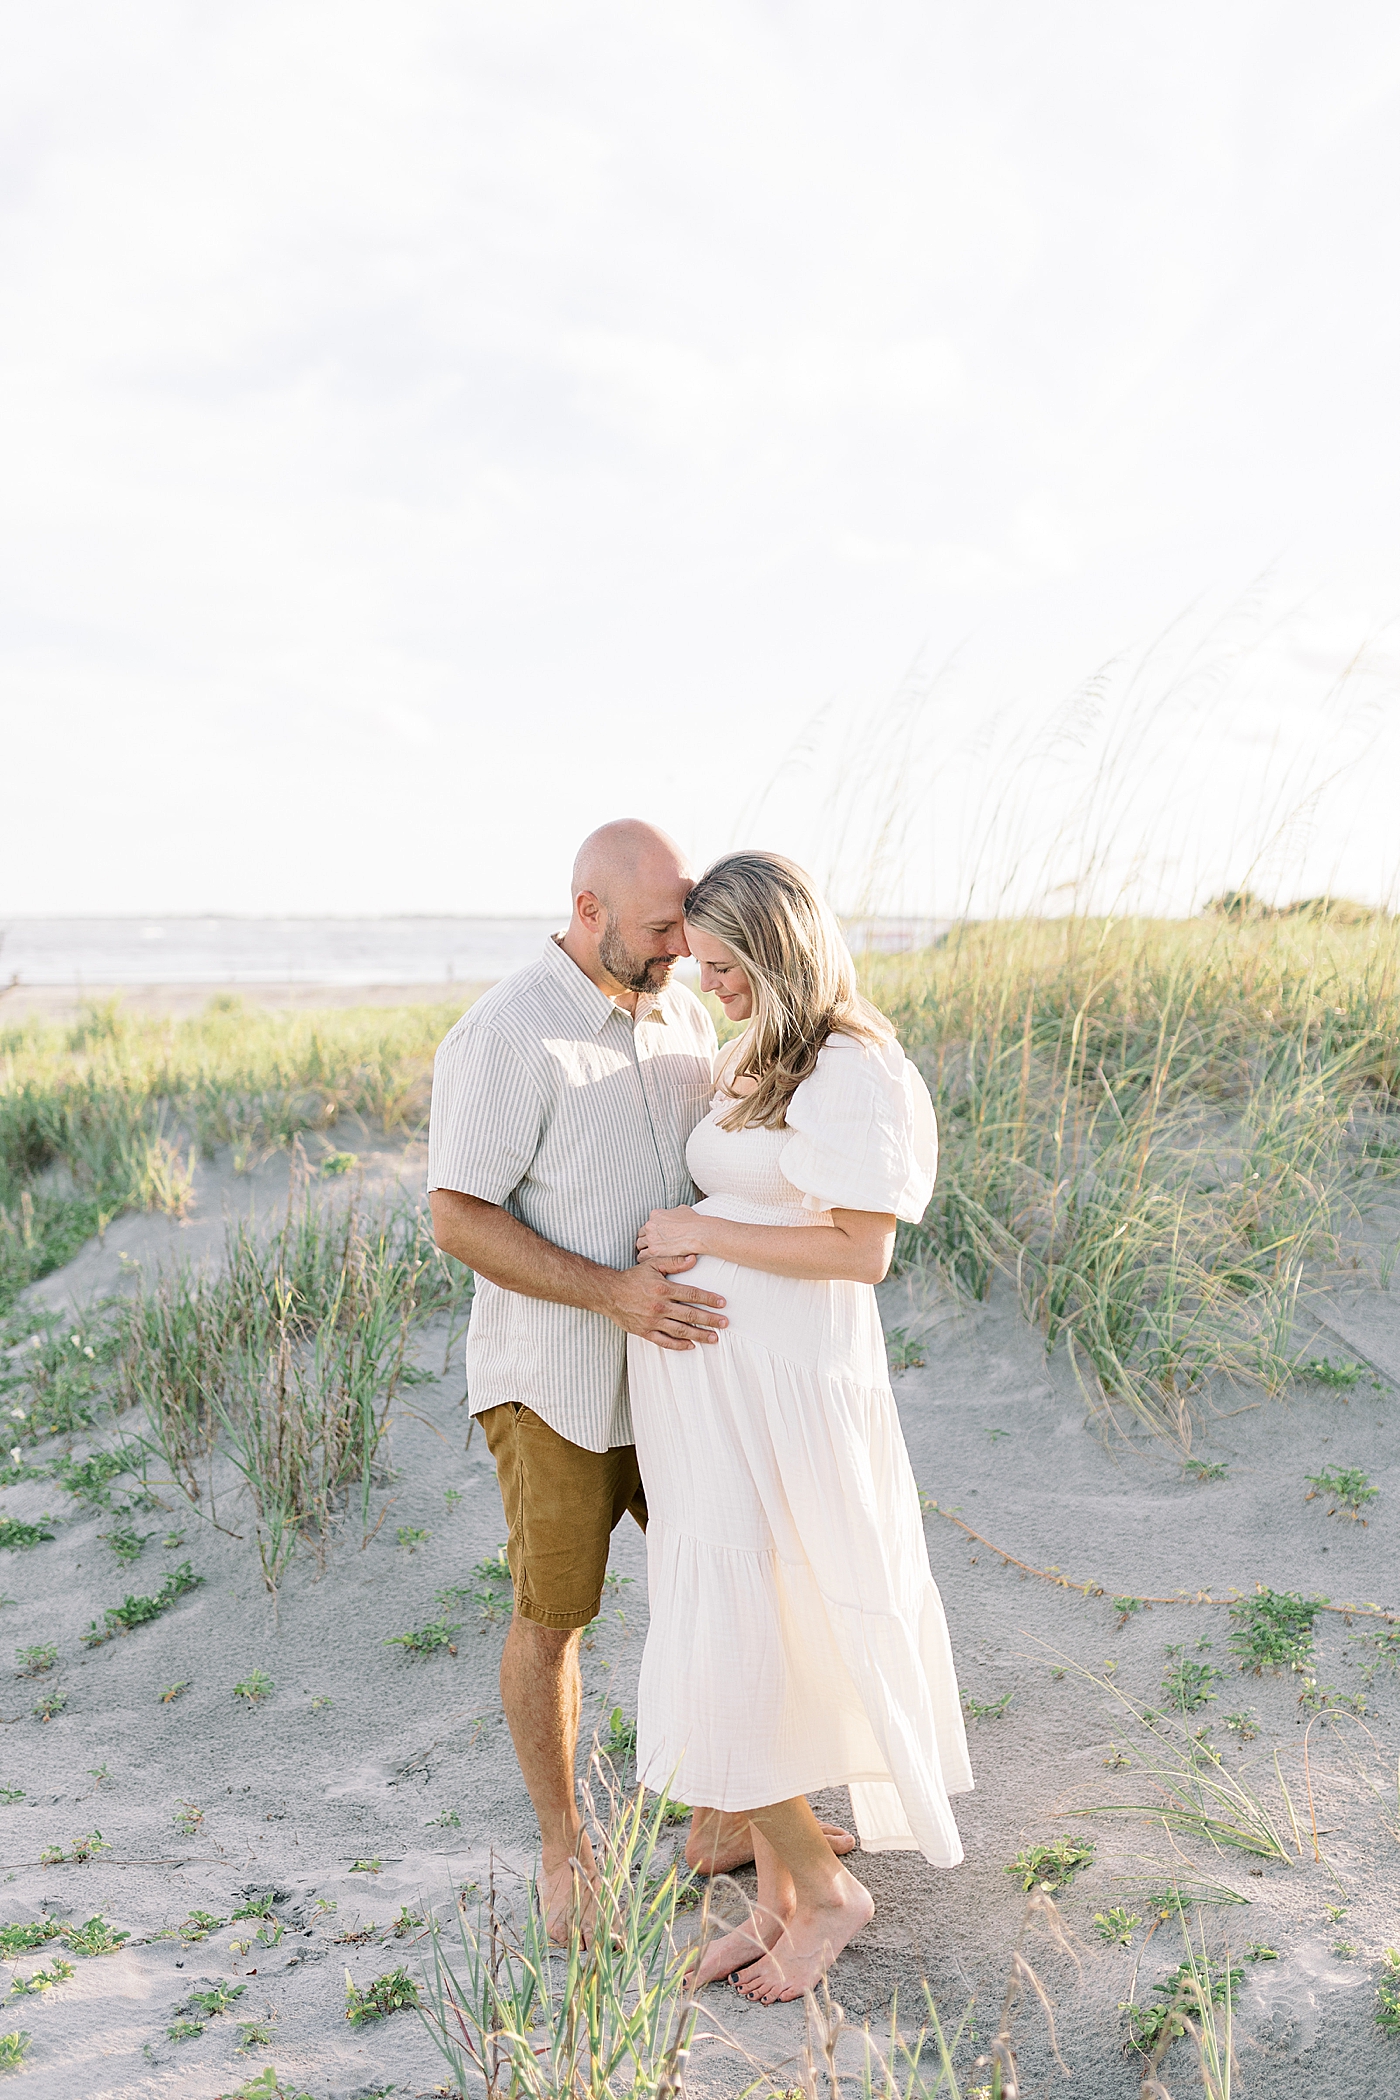 Mom and dad to be snuggling during their Maternity Session at Folly Beach | Image by Caitlyn Motycka